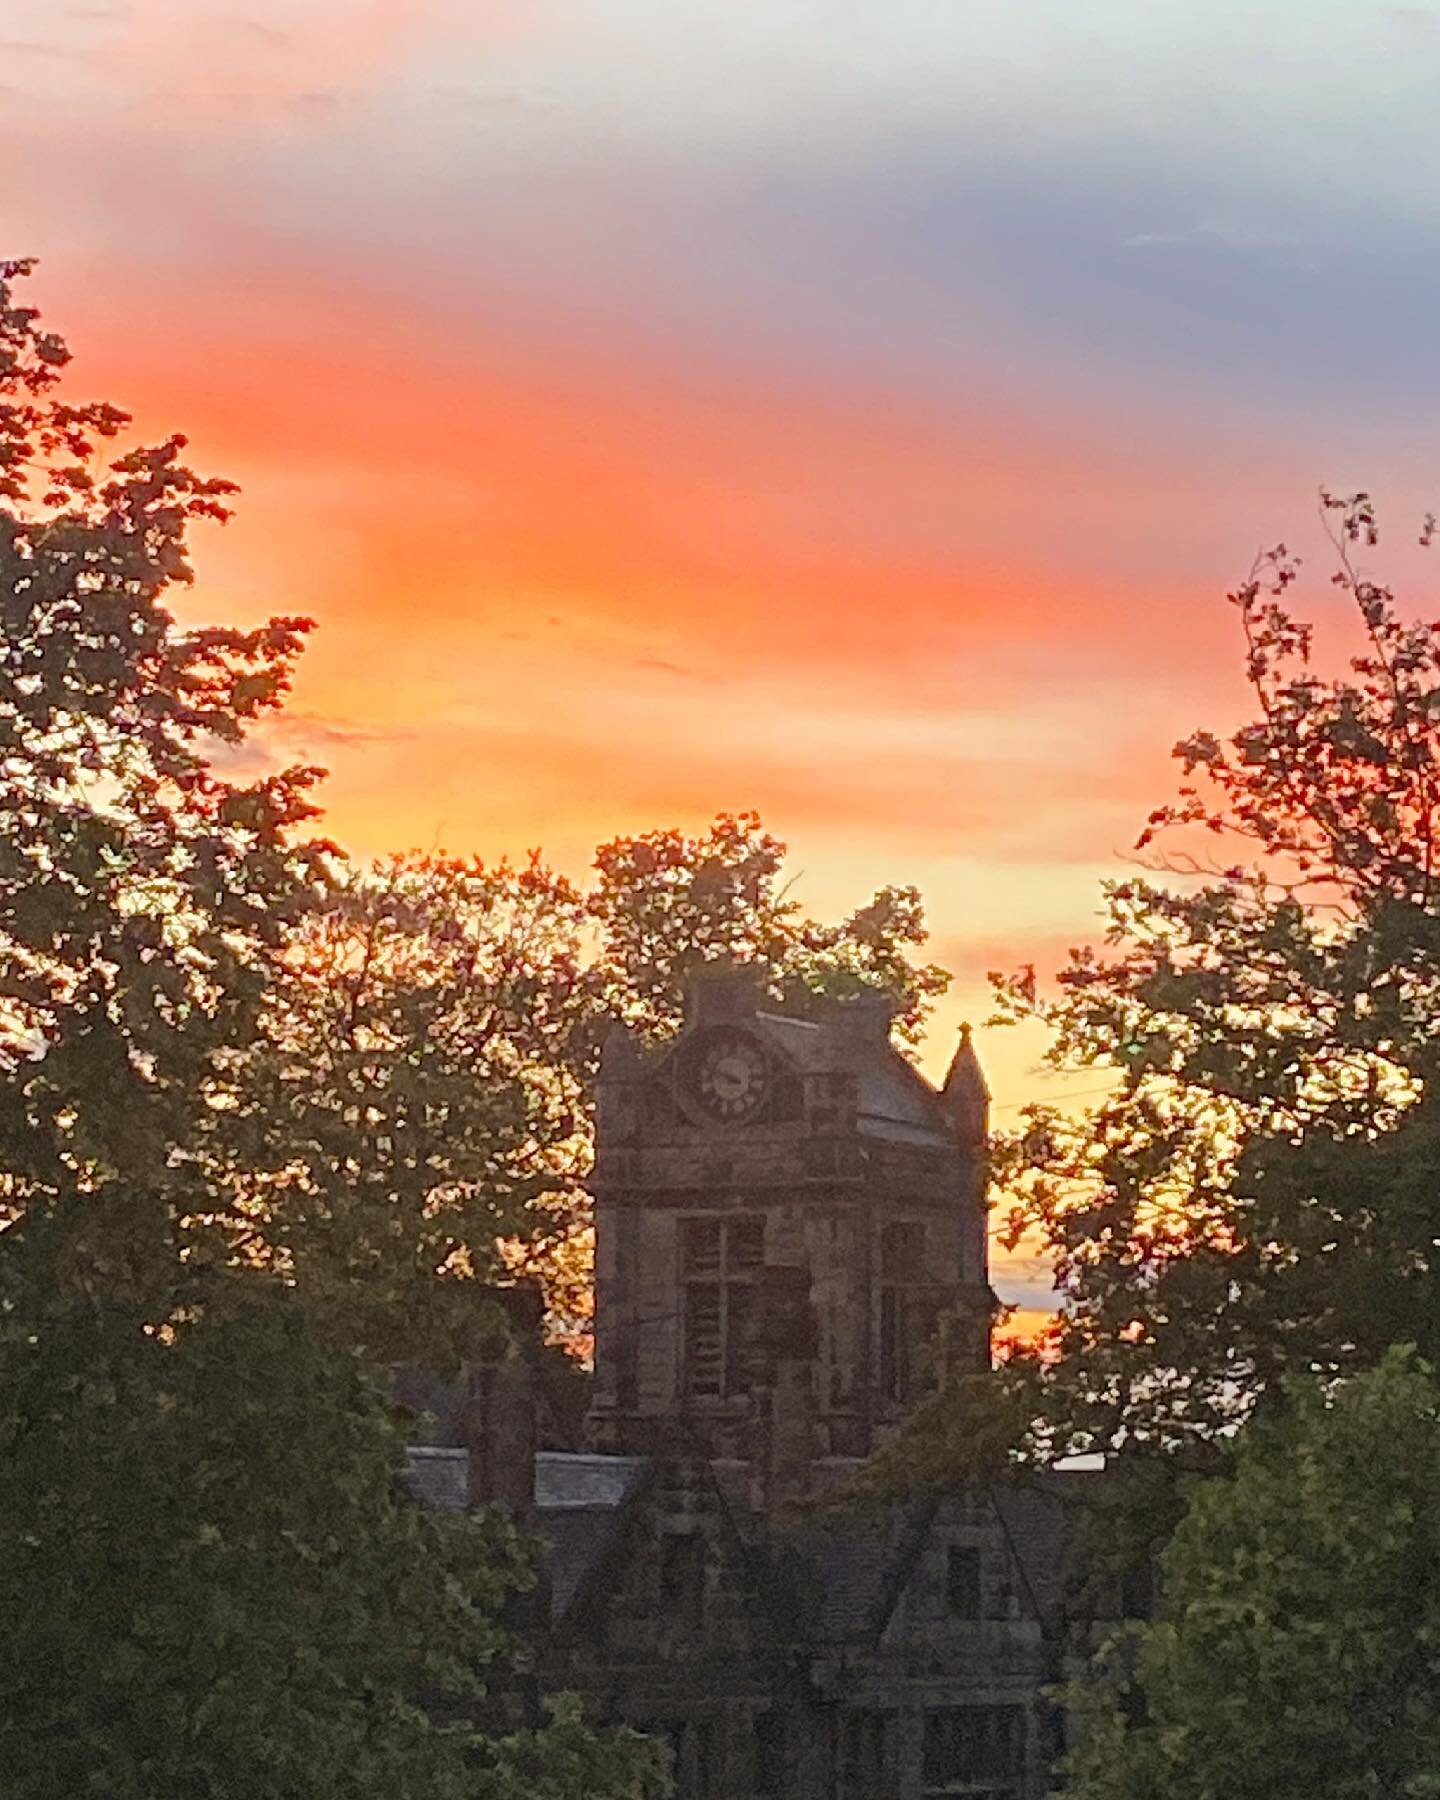 SATURDAY SUNSET from the studio. Swipe to see the anti-sunset. Sometimes a grey day has a colourful ending. #sunset #antisunset #photography #nofilters #sky #clouds #nature #studioview #studioviewoftheday #ashbyschool #historicbuilding #silhouette #n